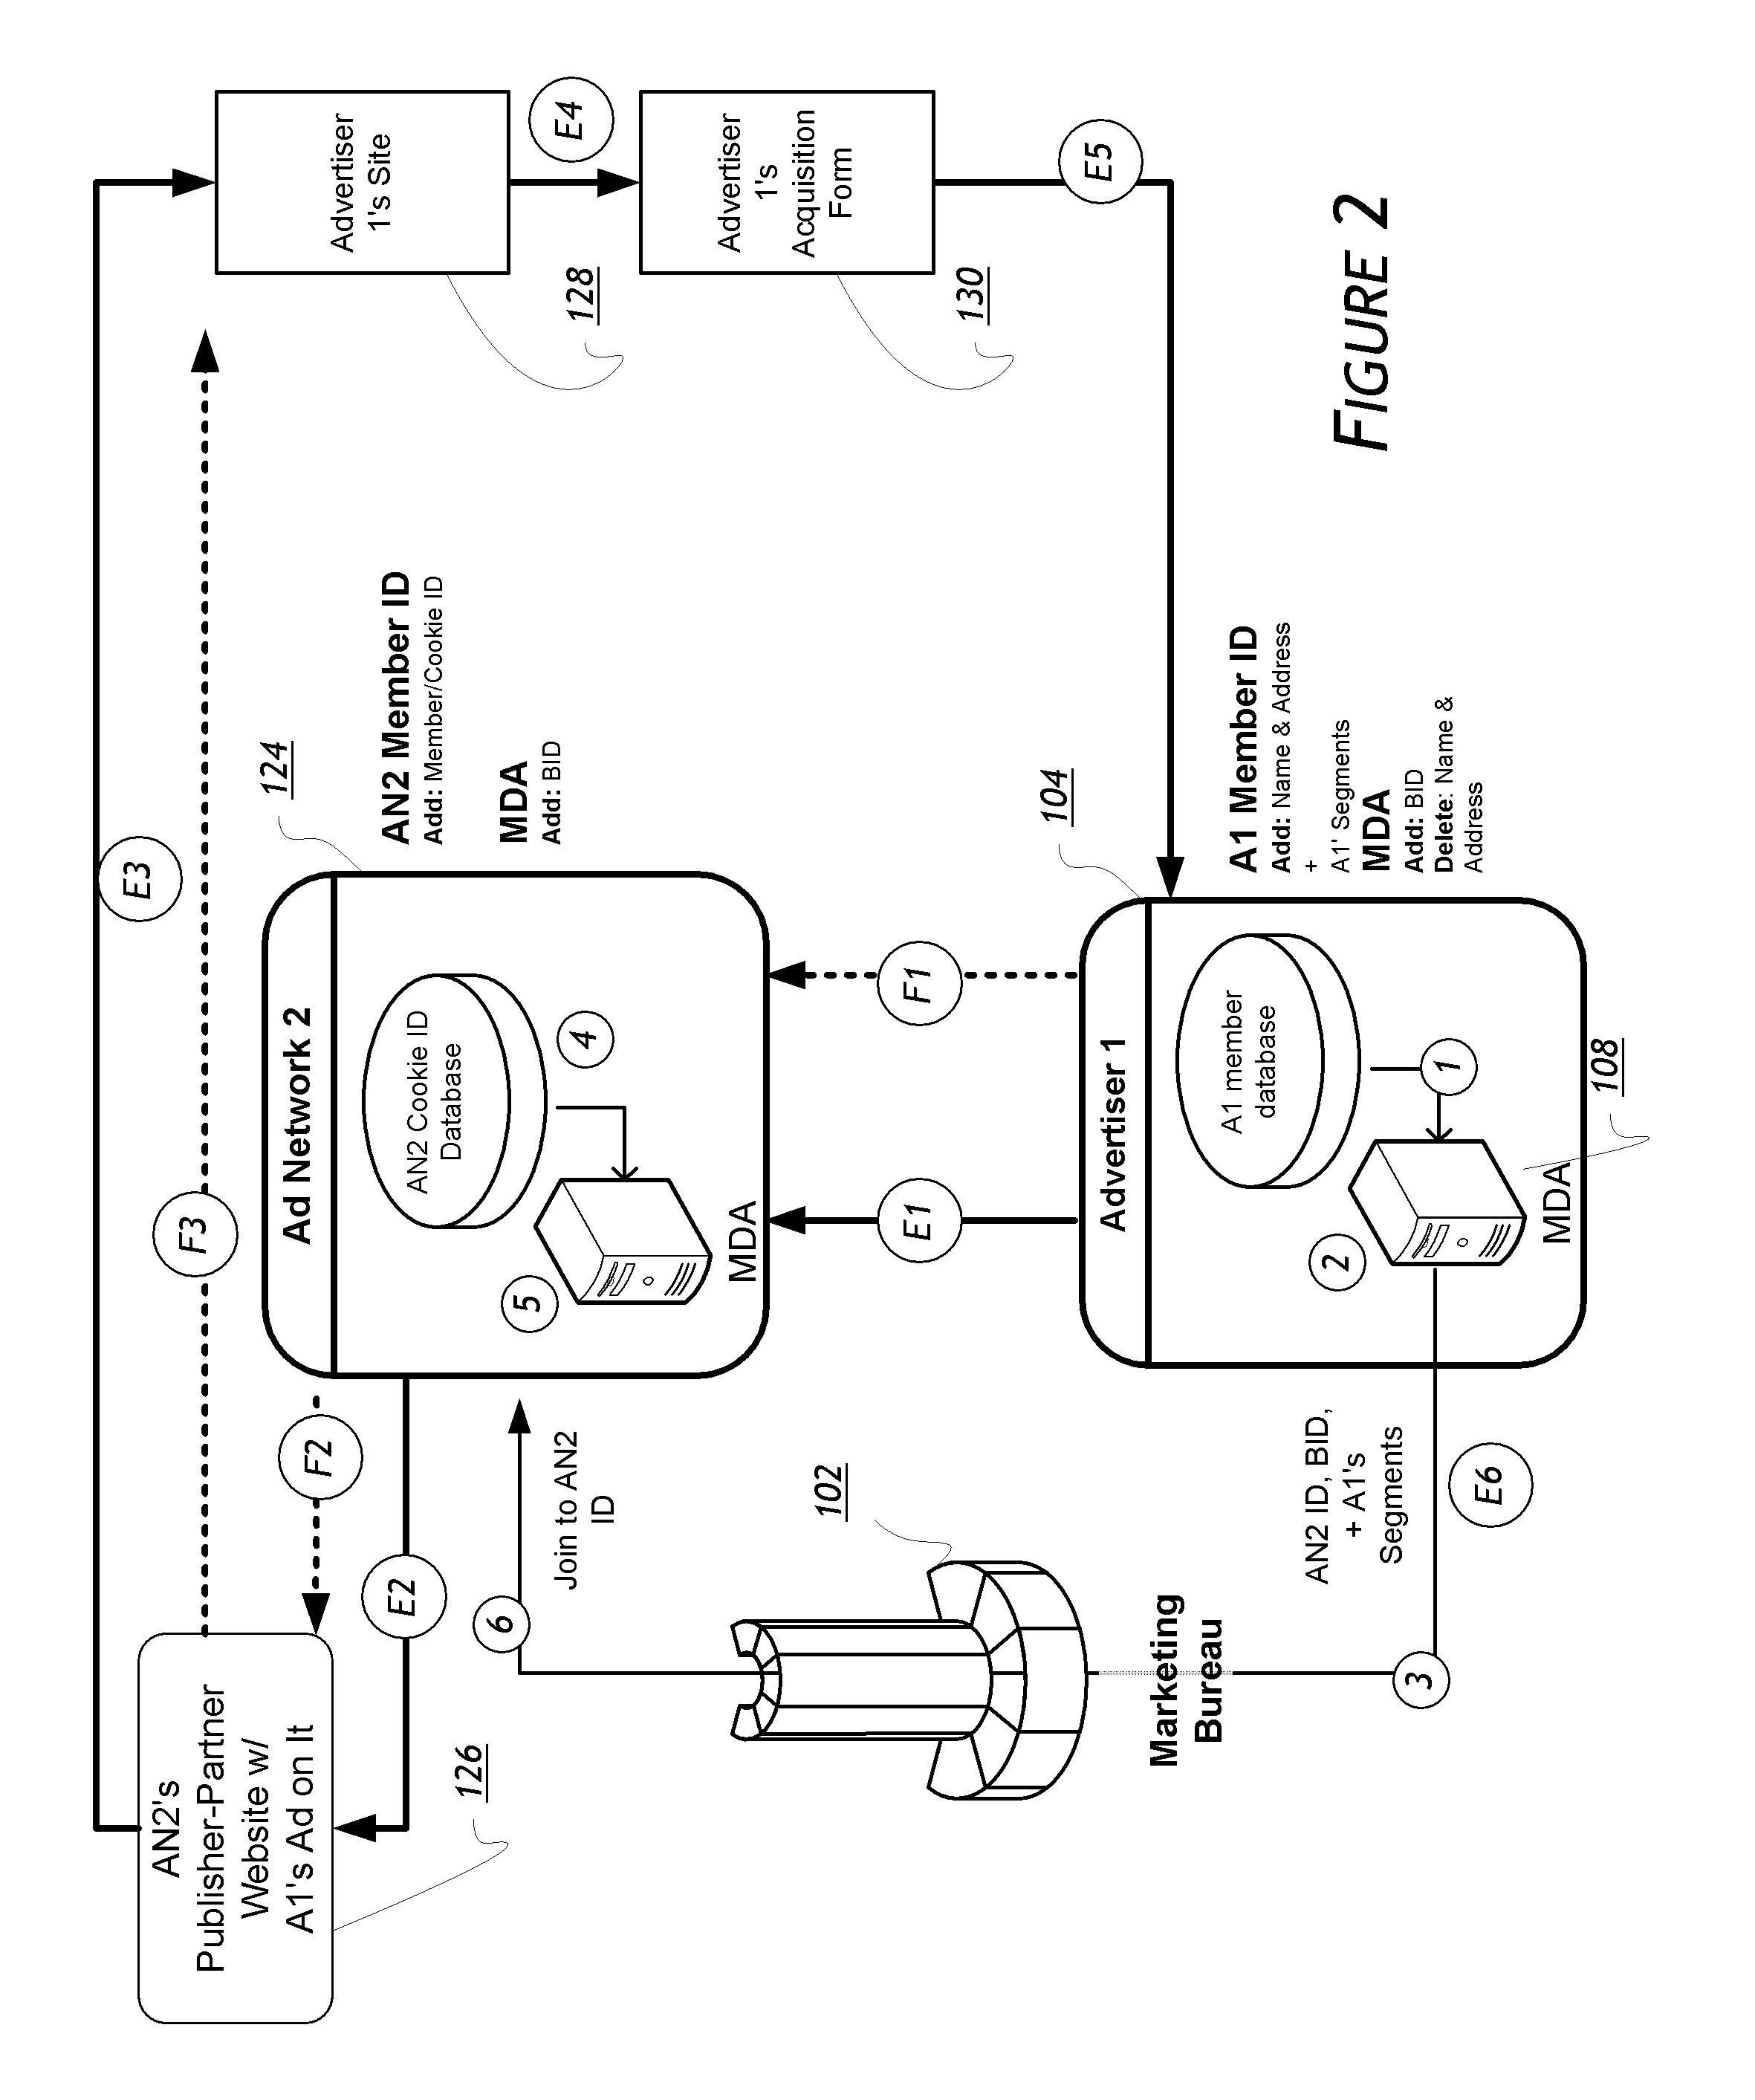 Systems and methods for providing anonymized user profile data